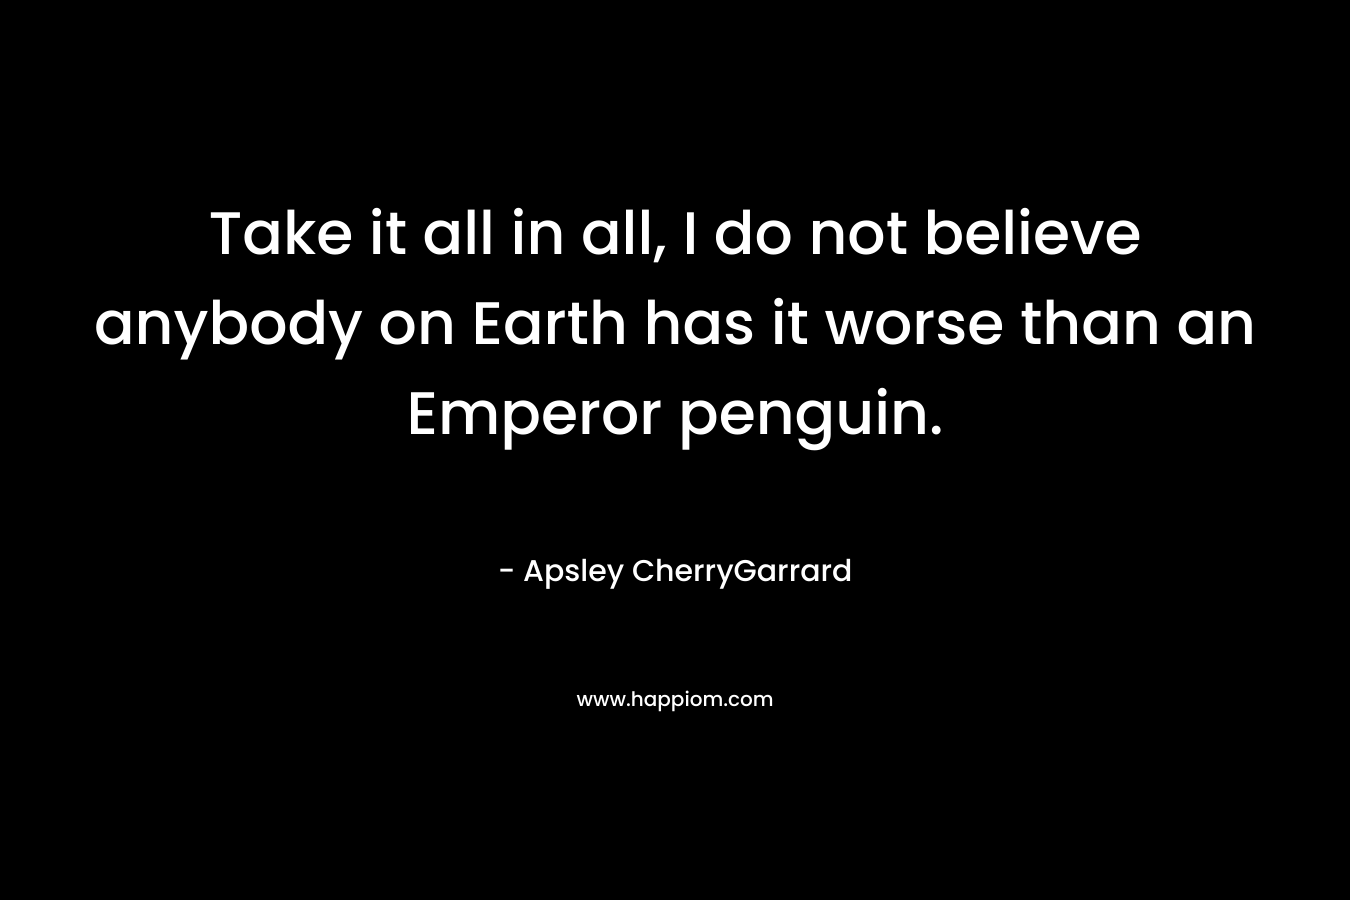 Take it all in all, I do not believe anybody on Earth has it worse than an Emperor penguin.